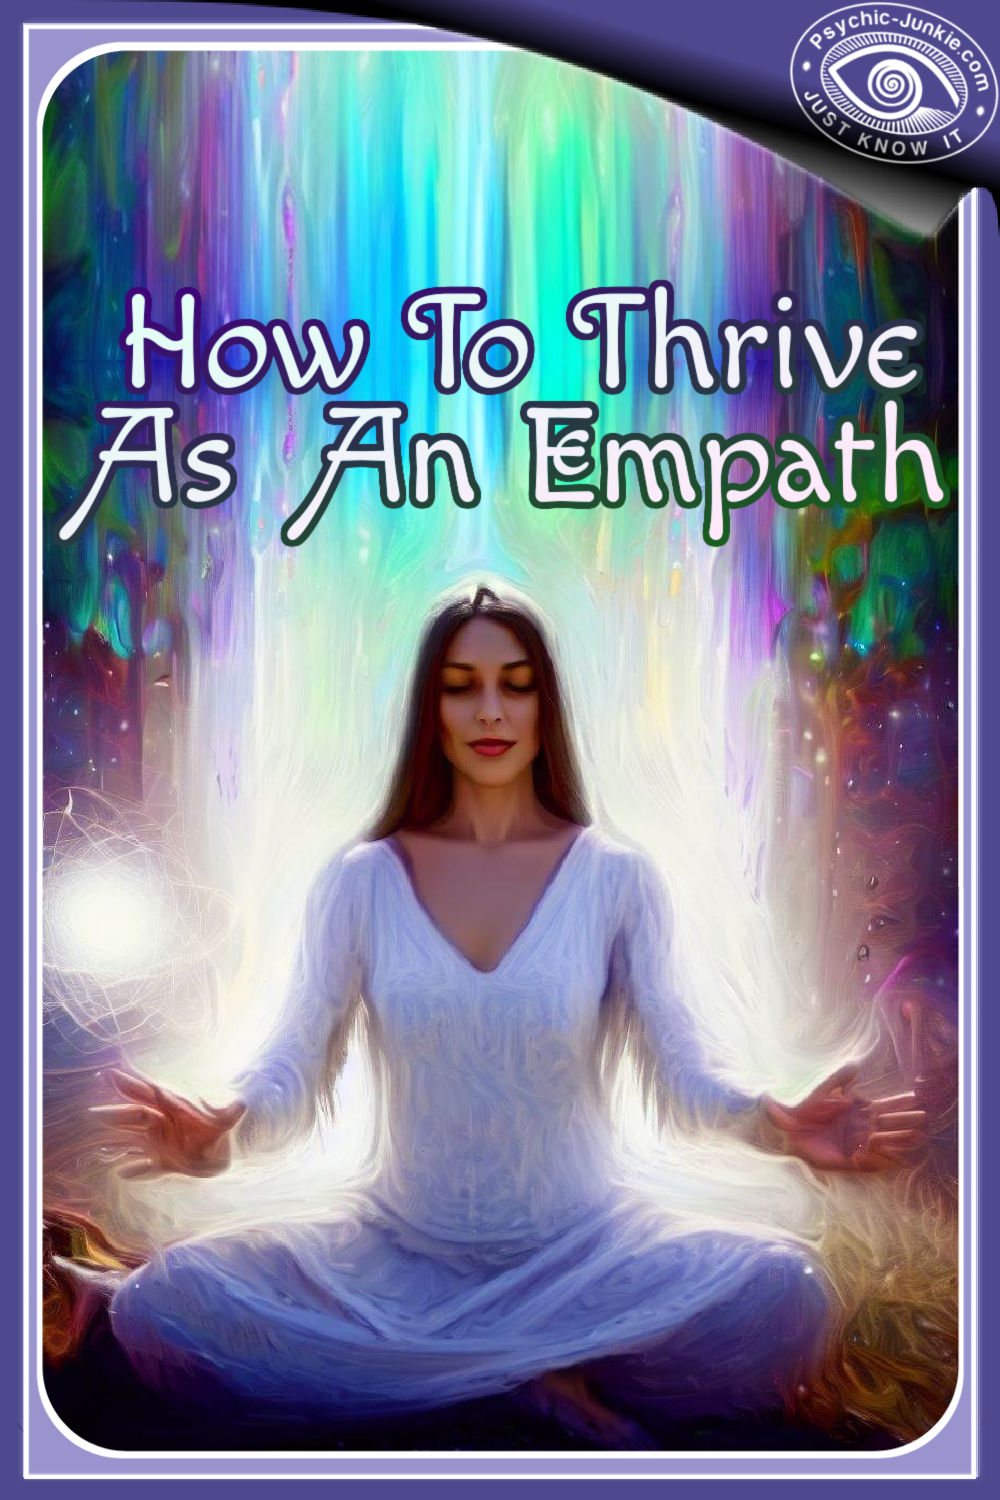 How To Be An Empath